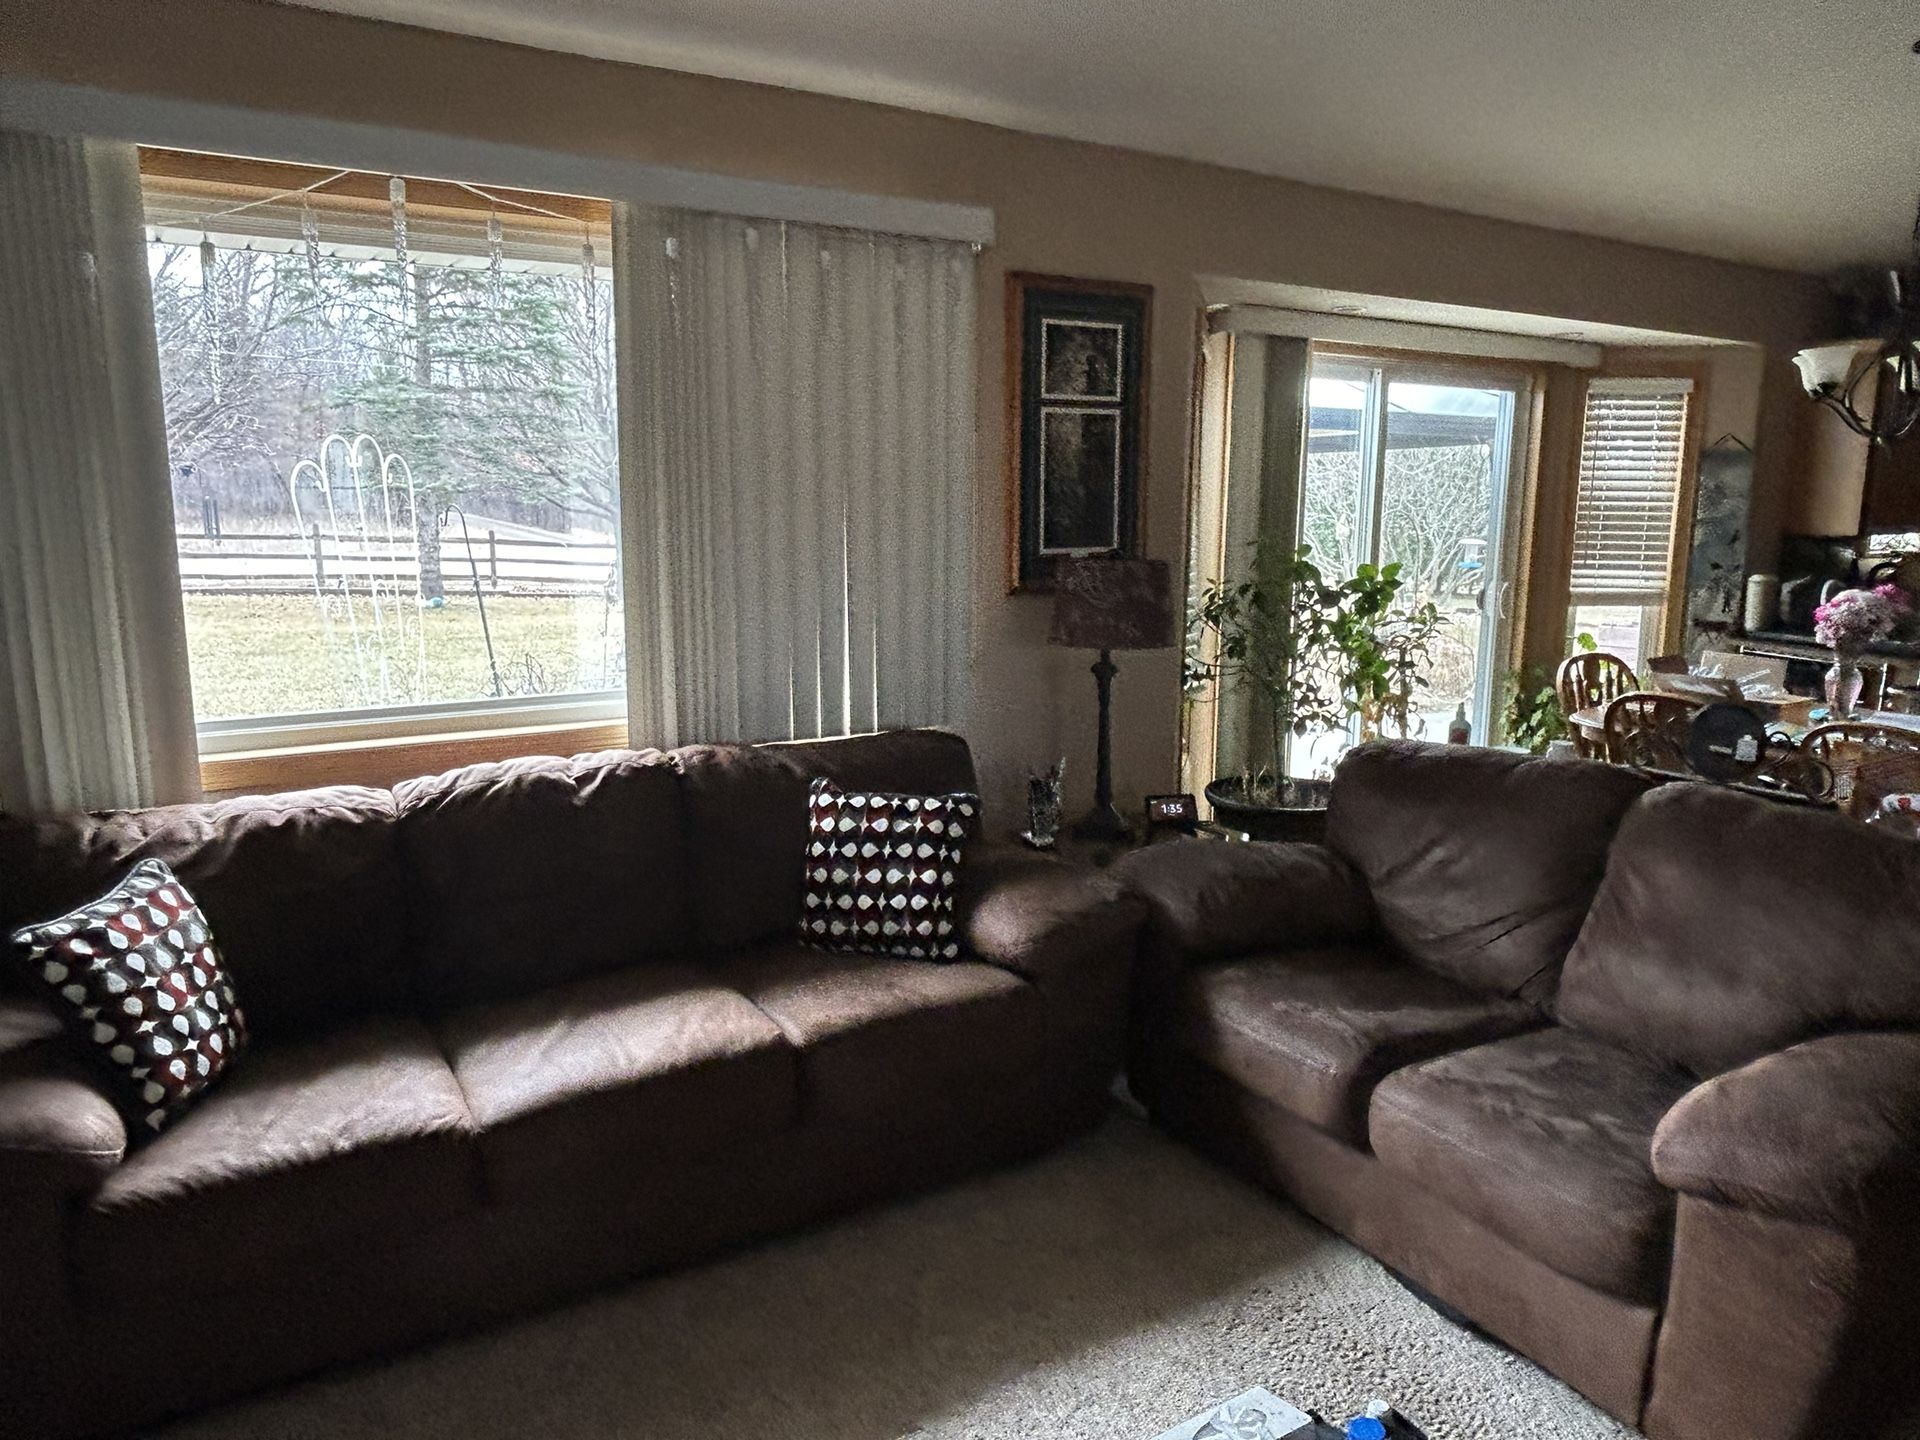 Free Couch And Love Seat